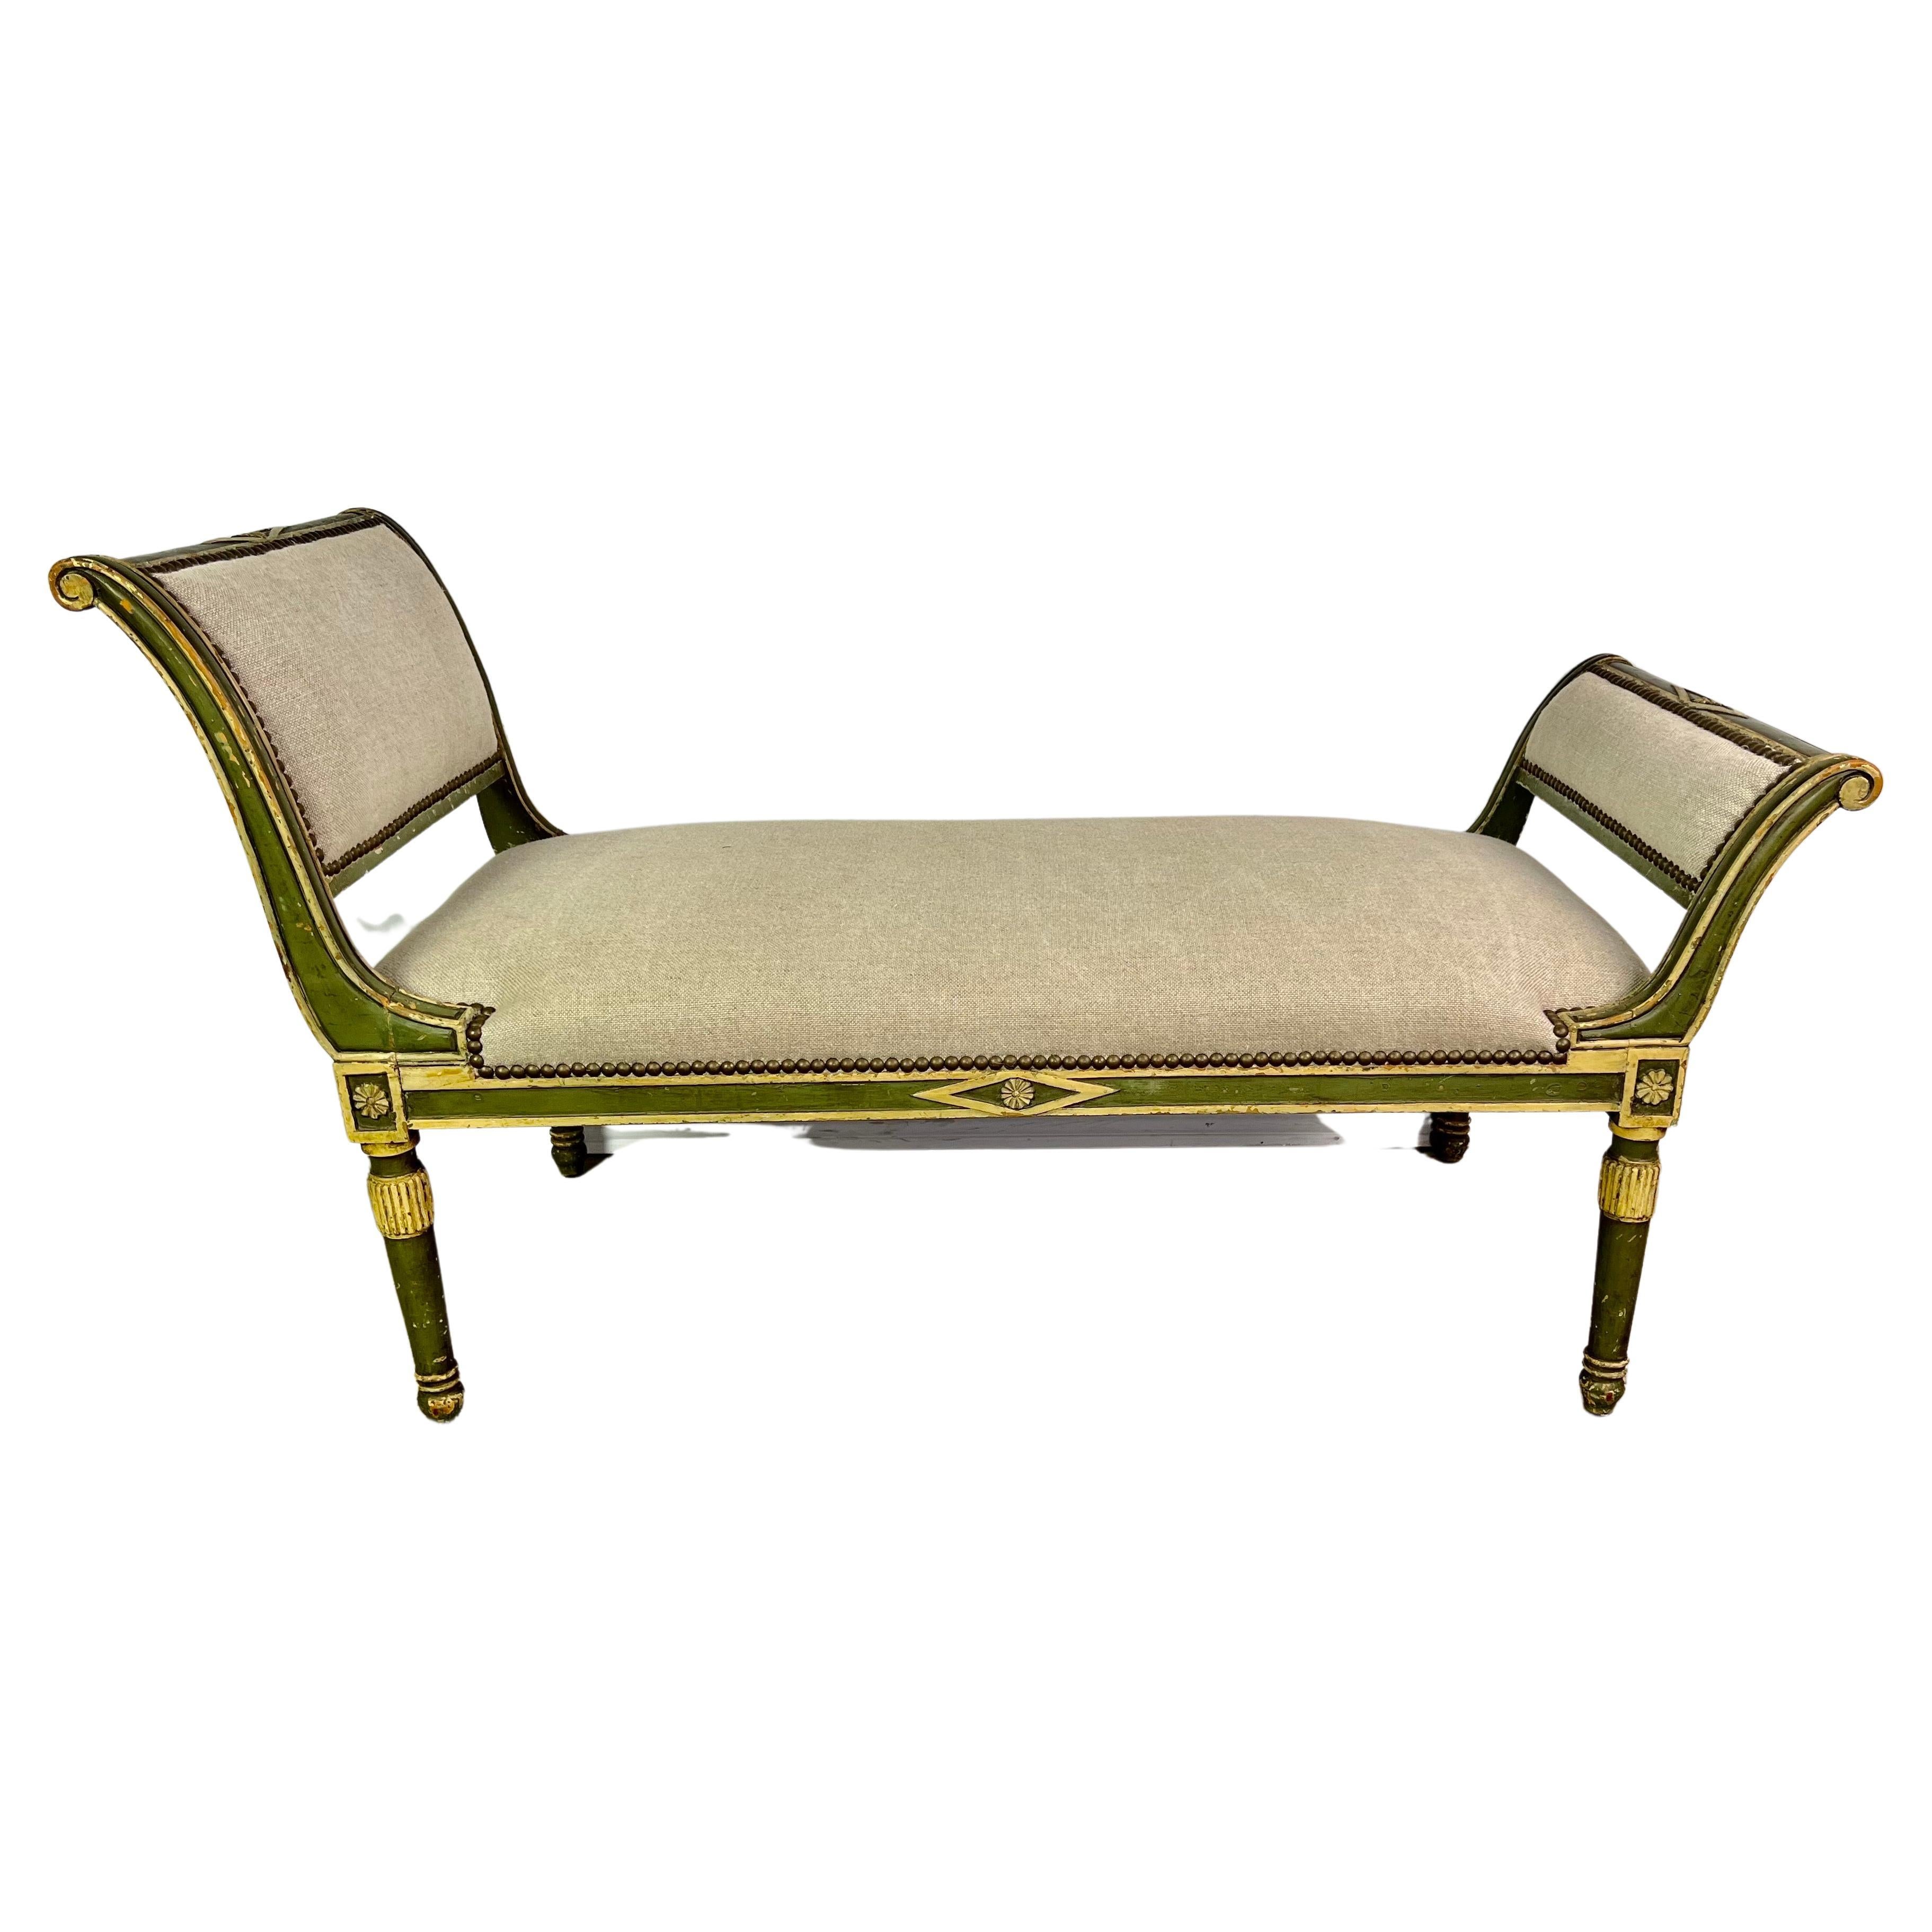 Painted Neoclassical Style Painted Bench C. 1920